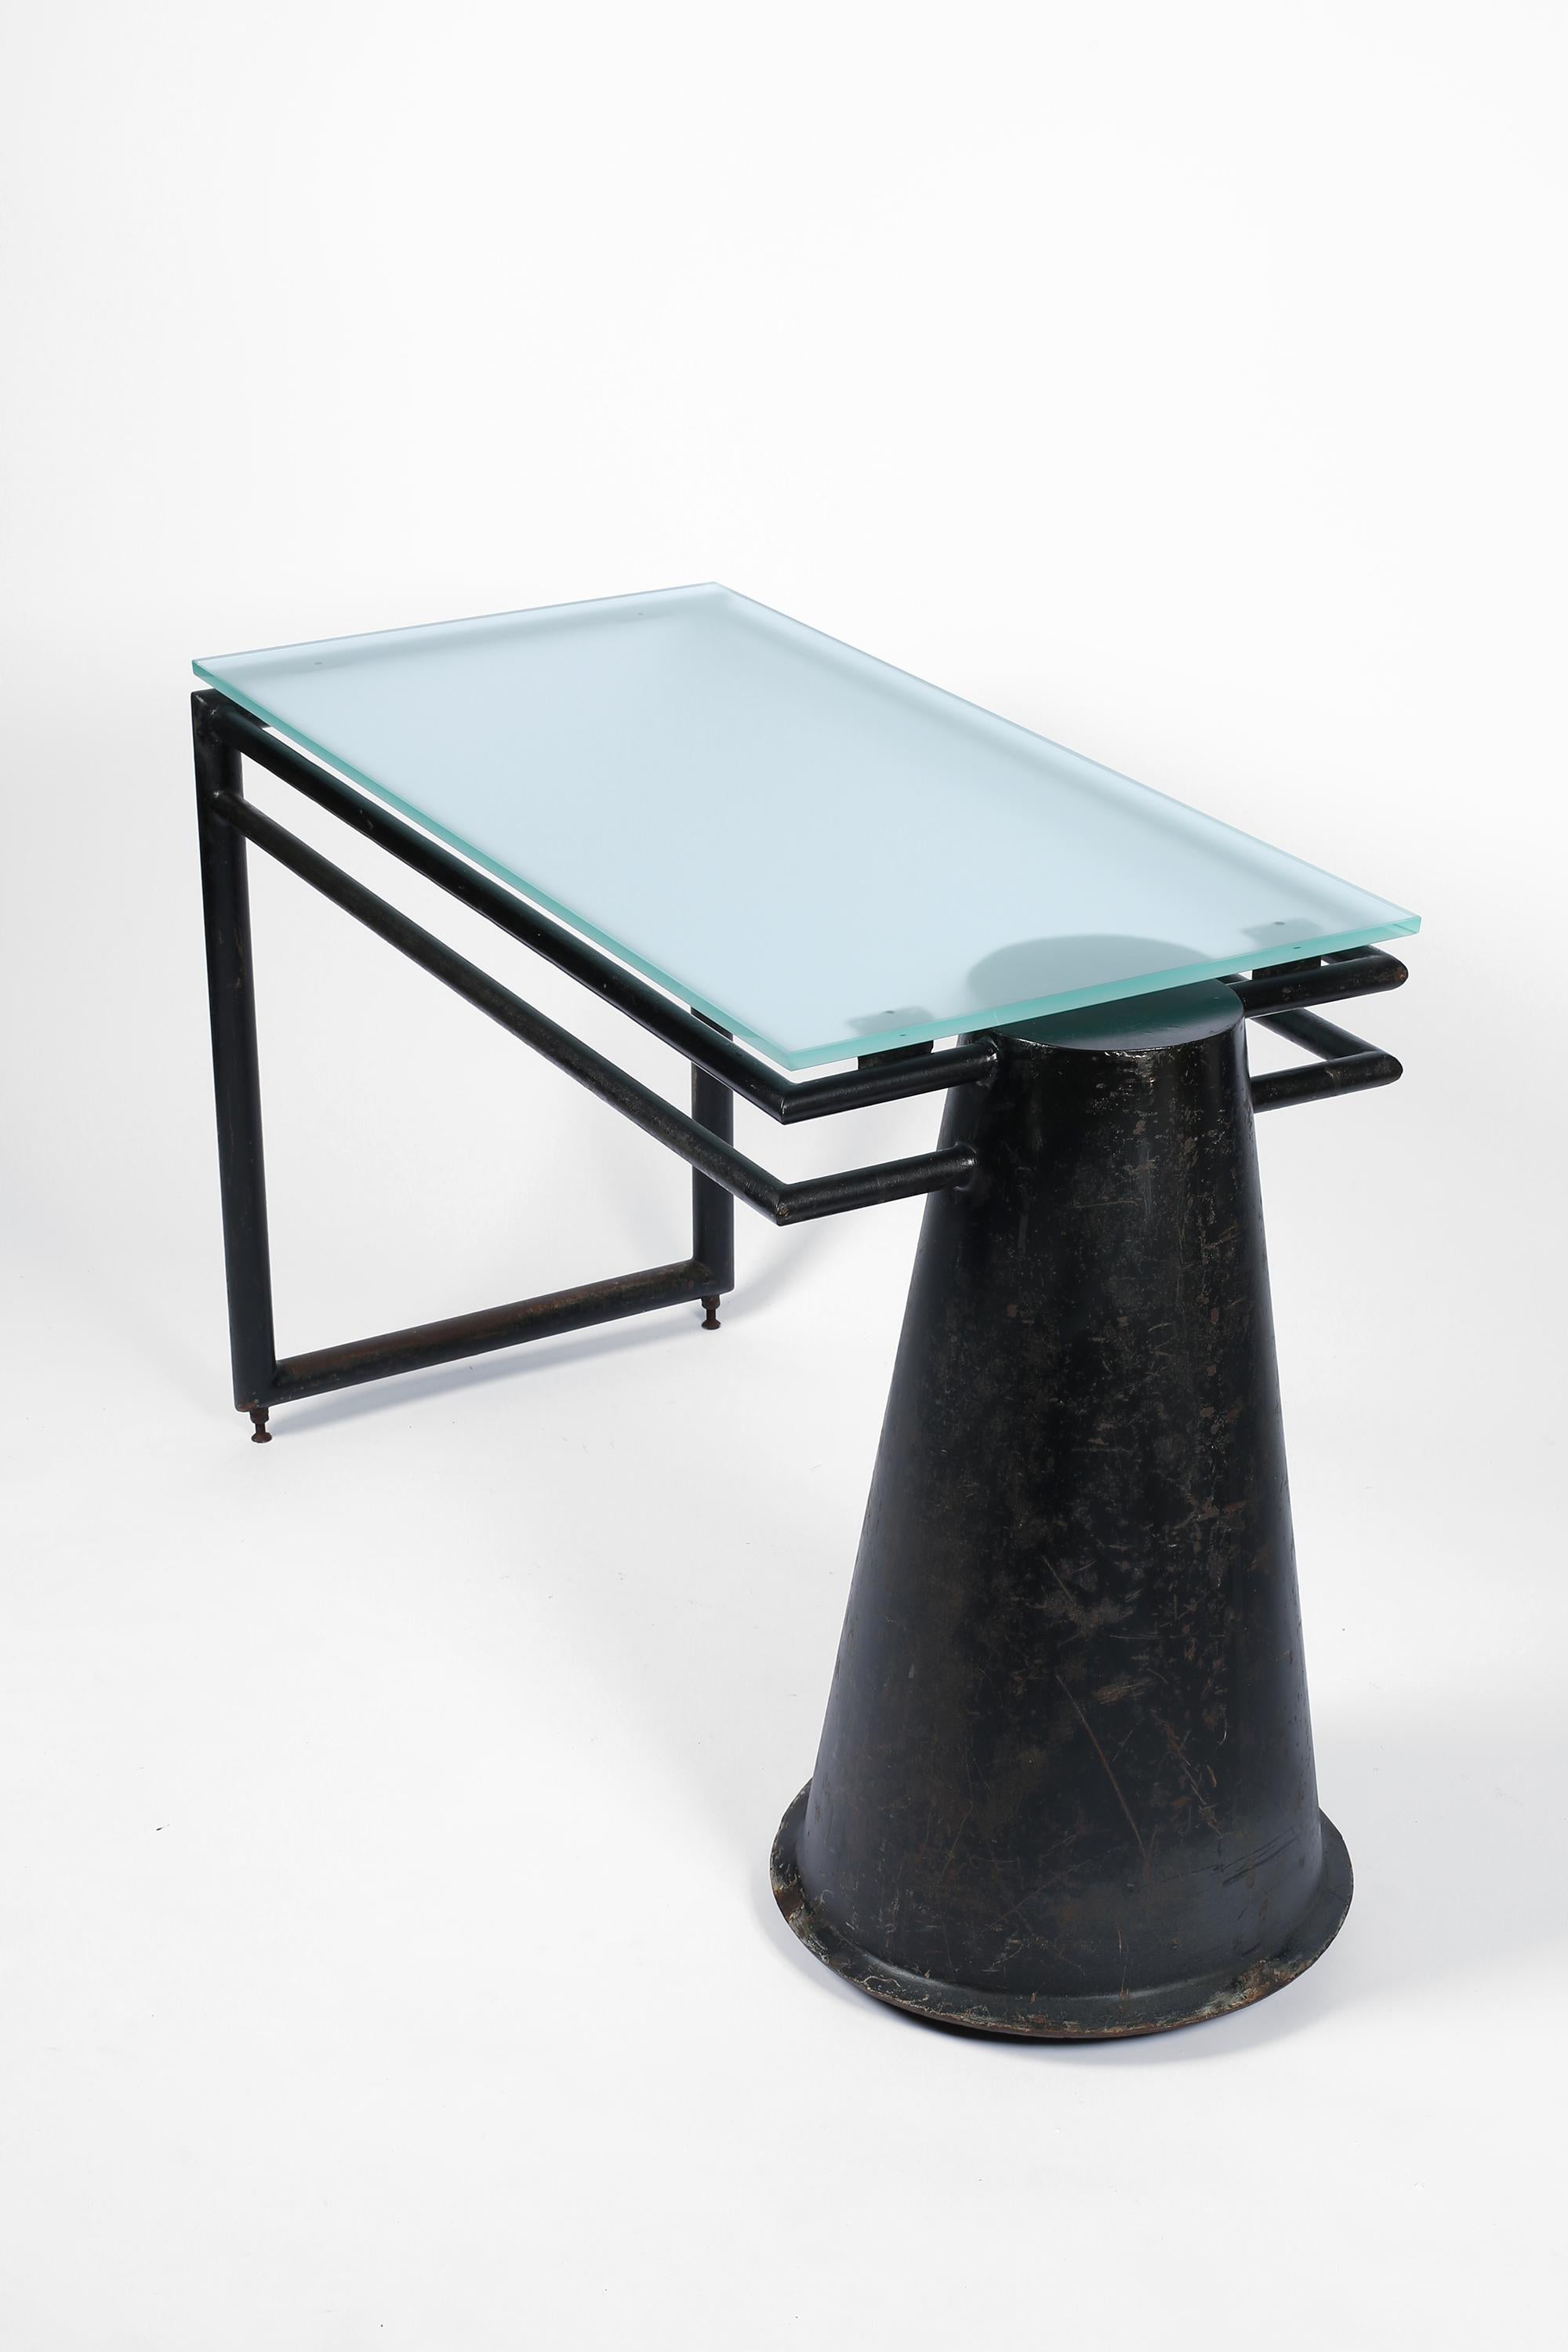 A sculptural statement desk in patinated black enamelled steel, with new floating frosted glass top. Le Corbusier-esque in it’S Form - a nod to both modernism and industrialism. French, early-mid 20th century.

W130 x D55.5 x H77 cm

Floor to